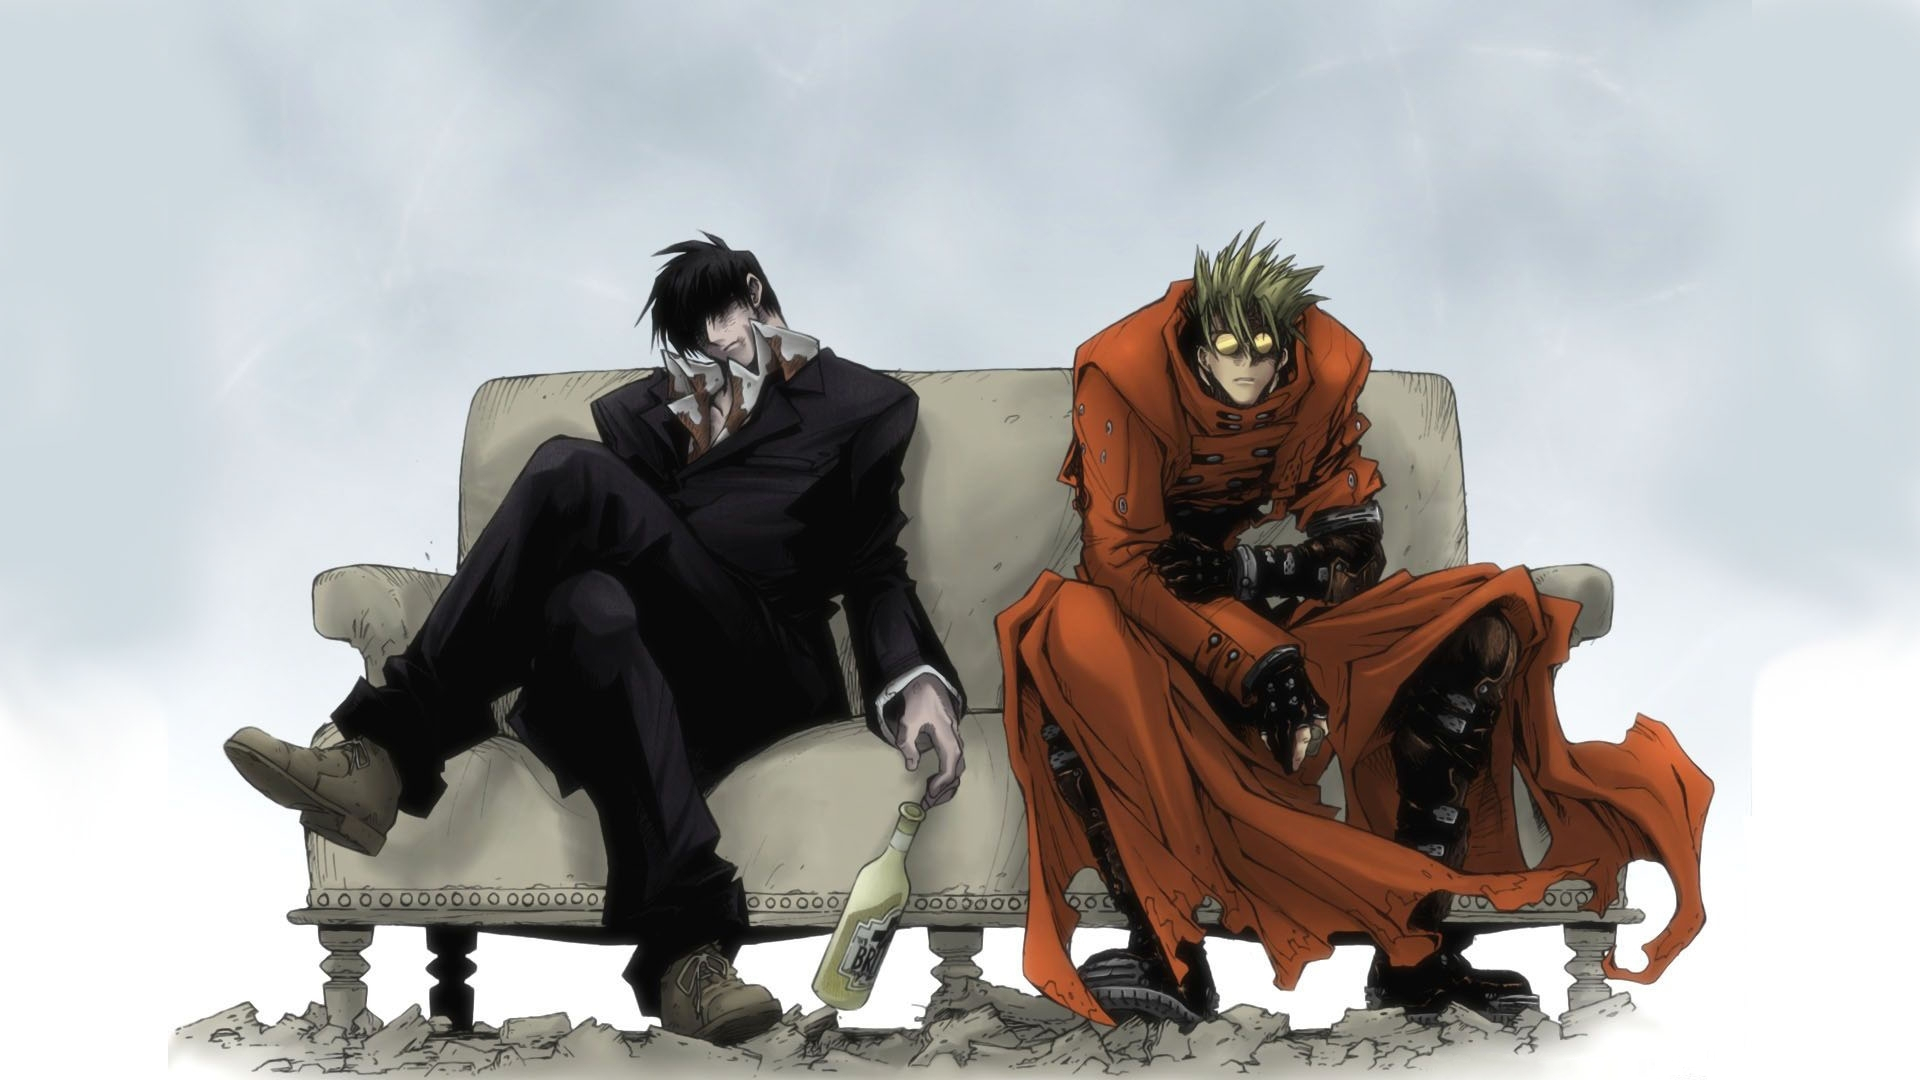 1920x1080 50+ Trigun HD Wallpapers and Backgrounds